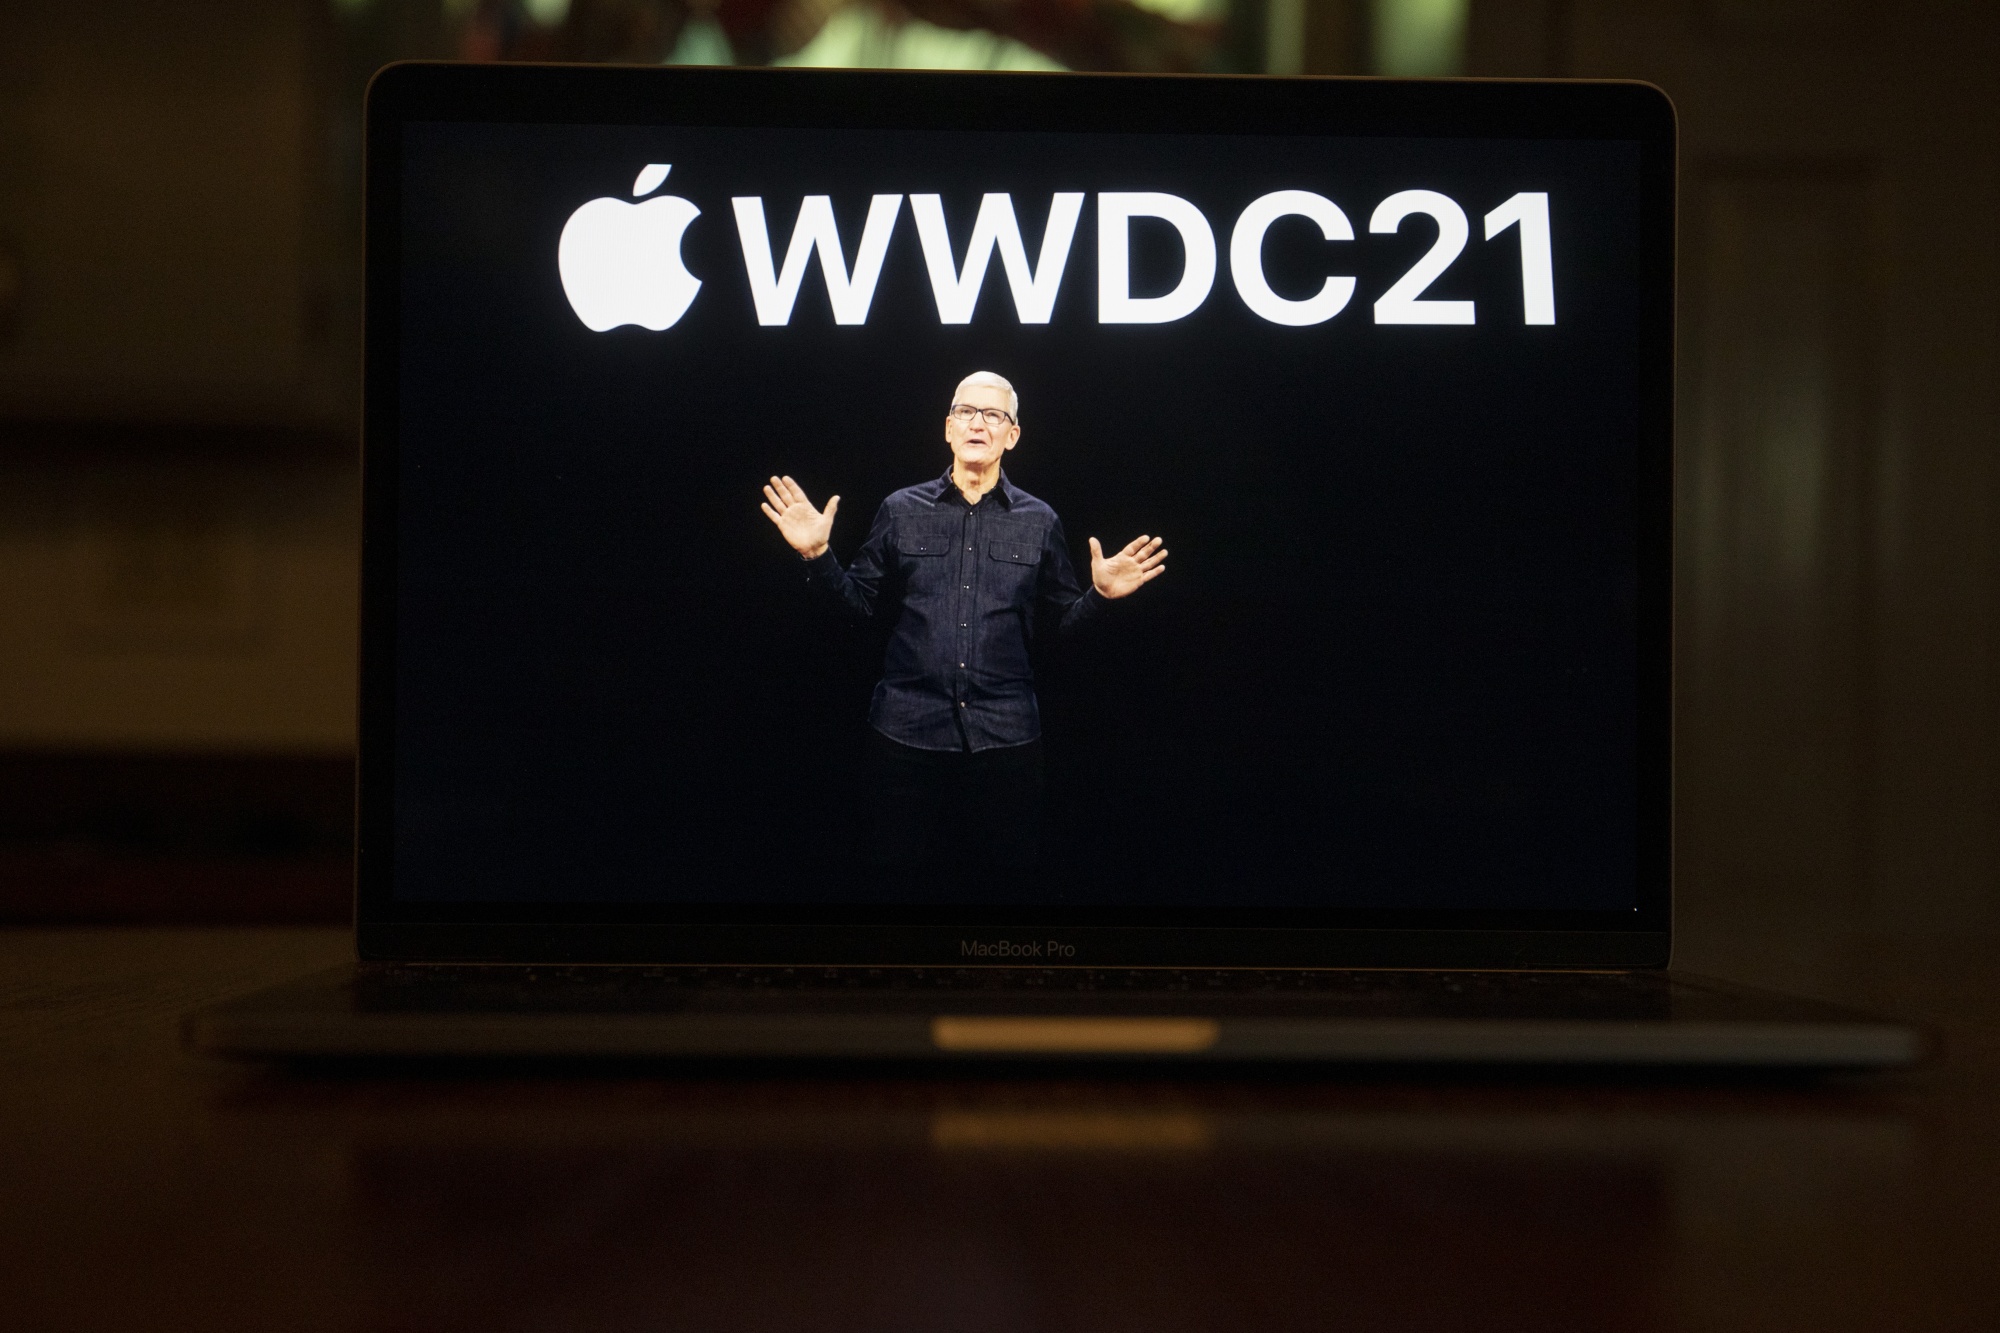 Apple (AAPL) WWDC To Be OnlineOnly for Third Year Bloomberg